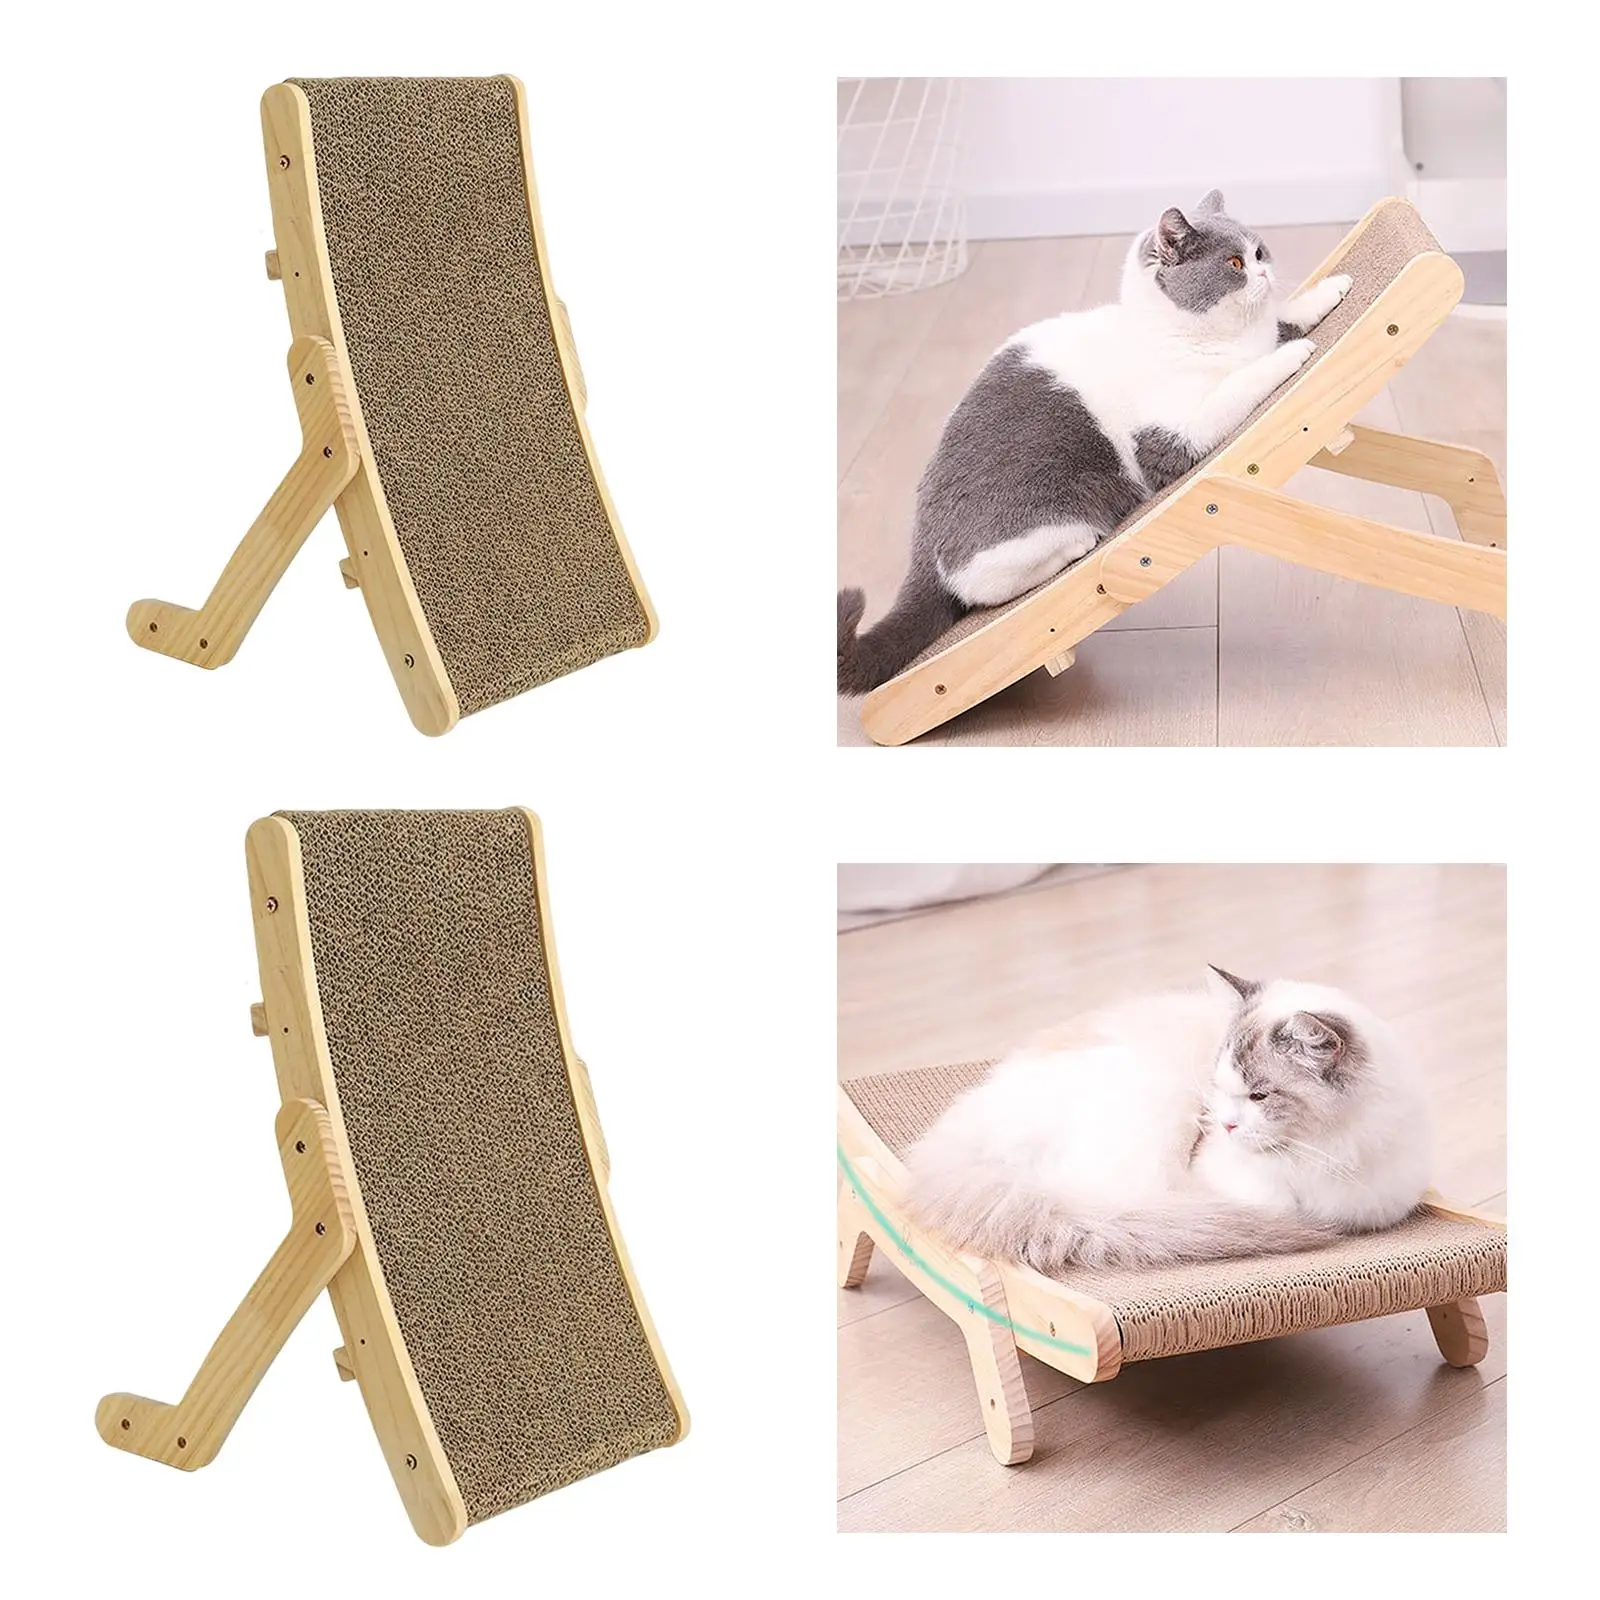 Durable Cat Scratcher Pad Interactive Play Toy Cardboard Grind Claws Furniture Protector Scratch Pad Scratching Board for Kitten